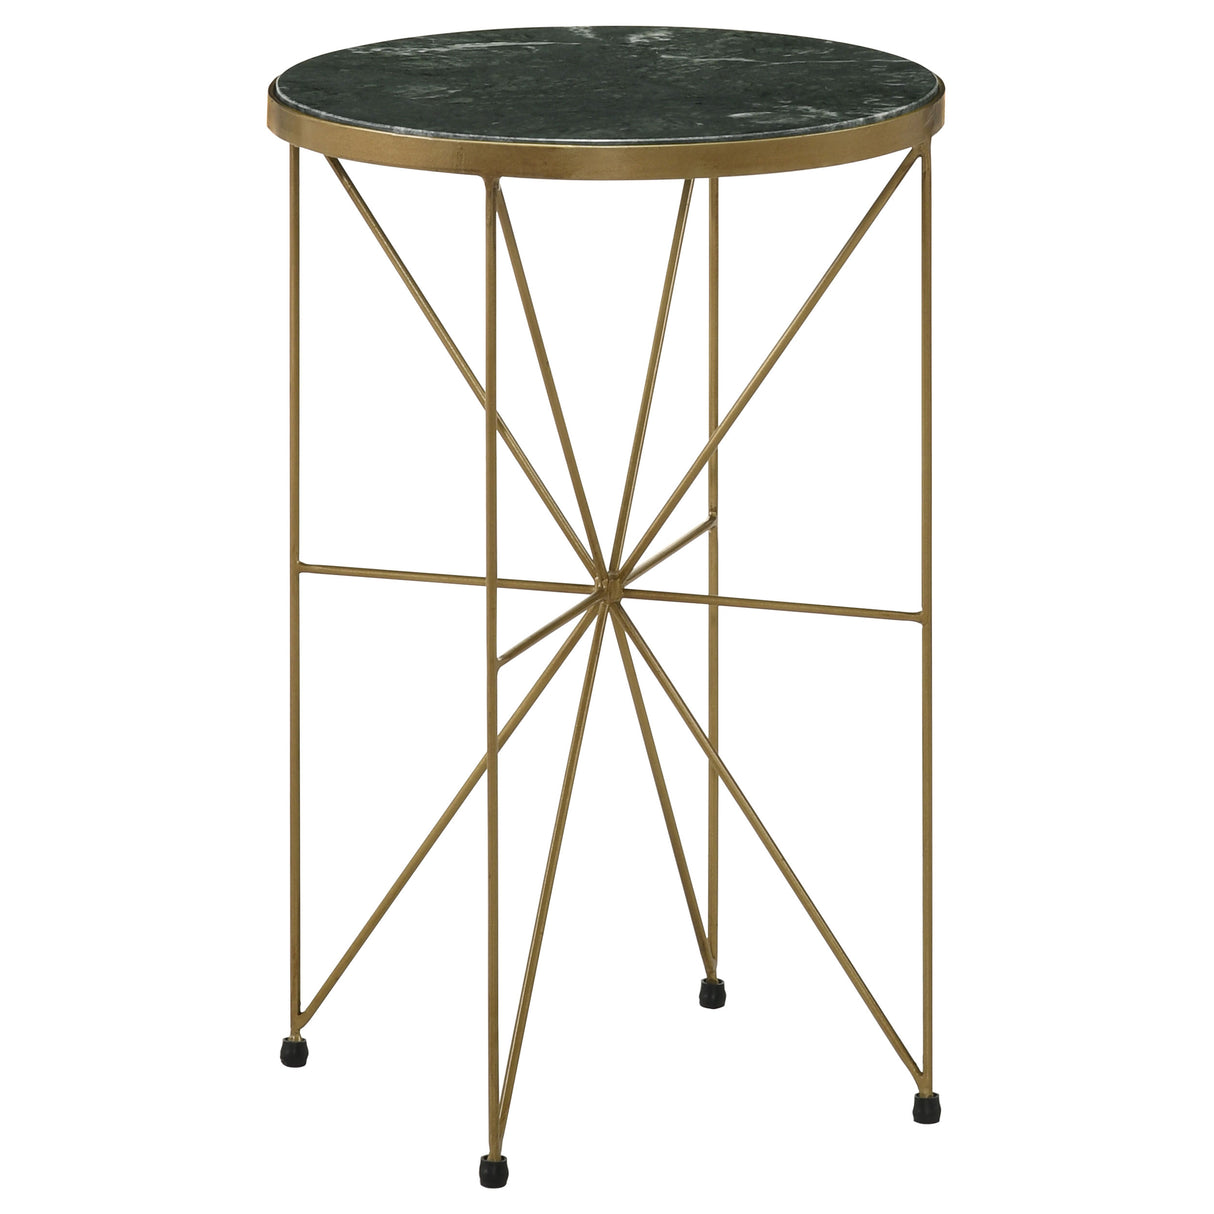 Side Table - Eliska Round Accent Table with Marble Top Green and Antique Gold